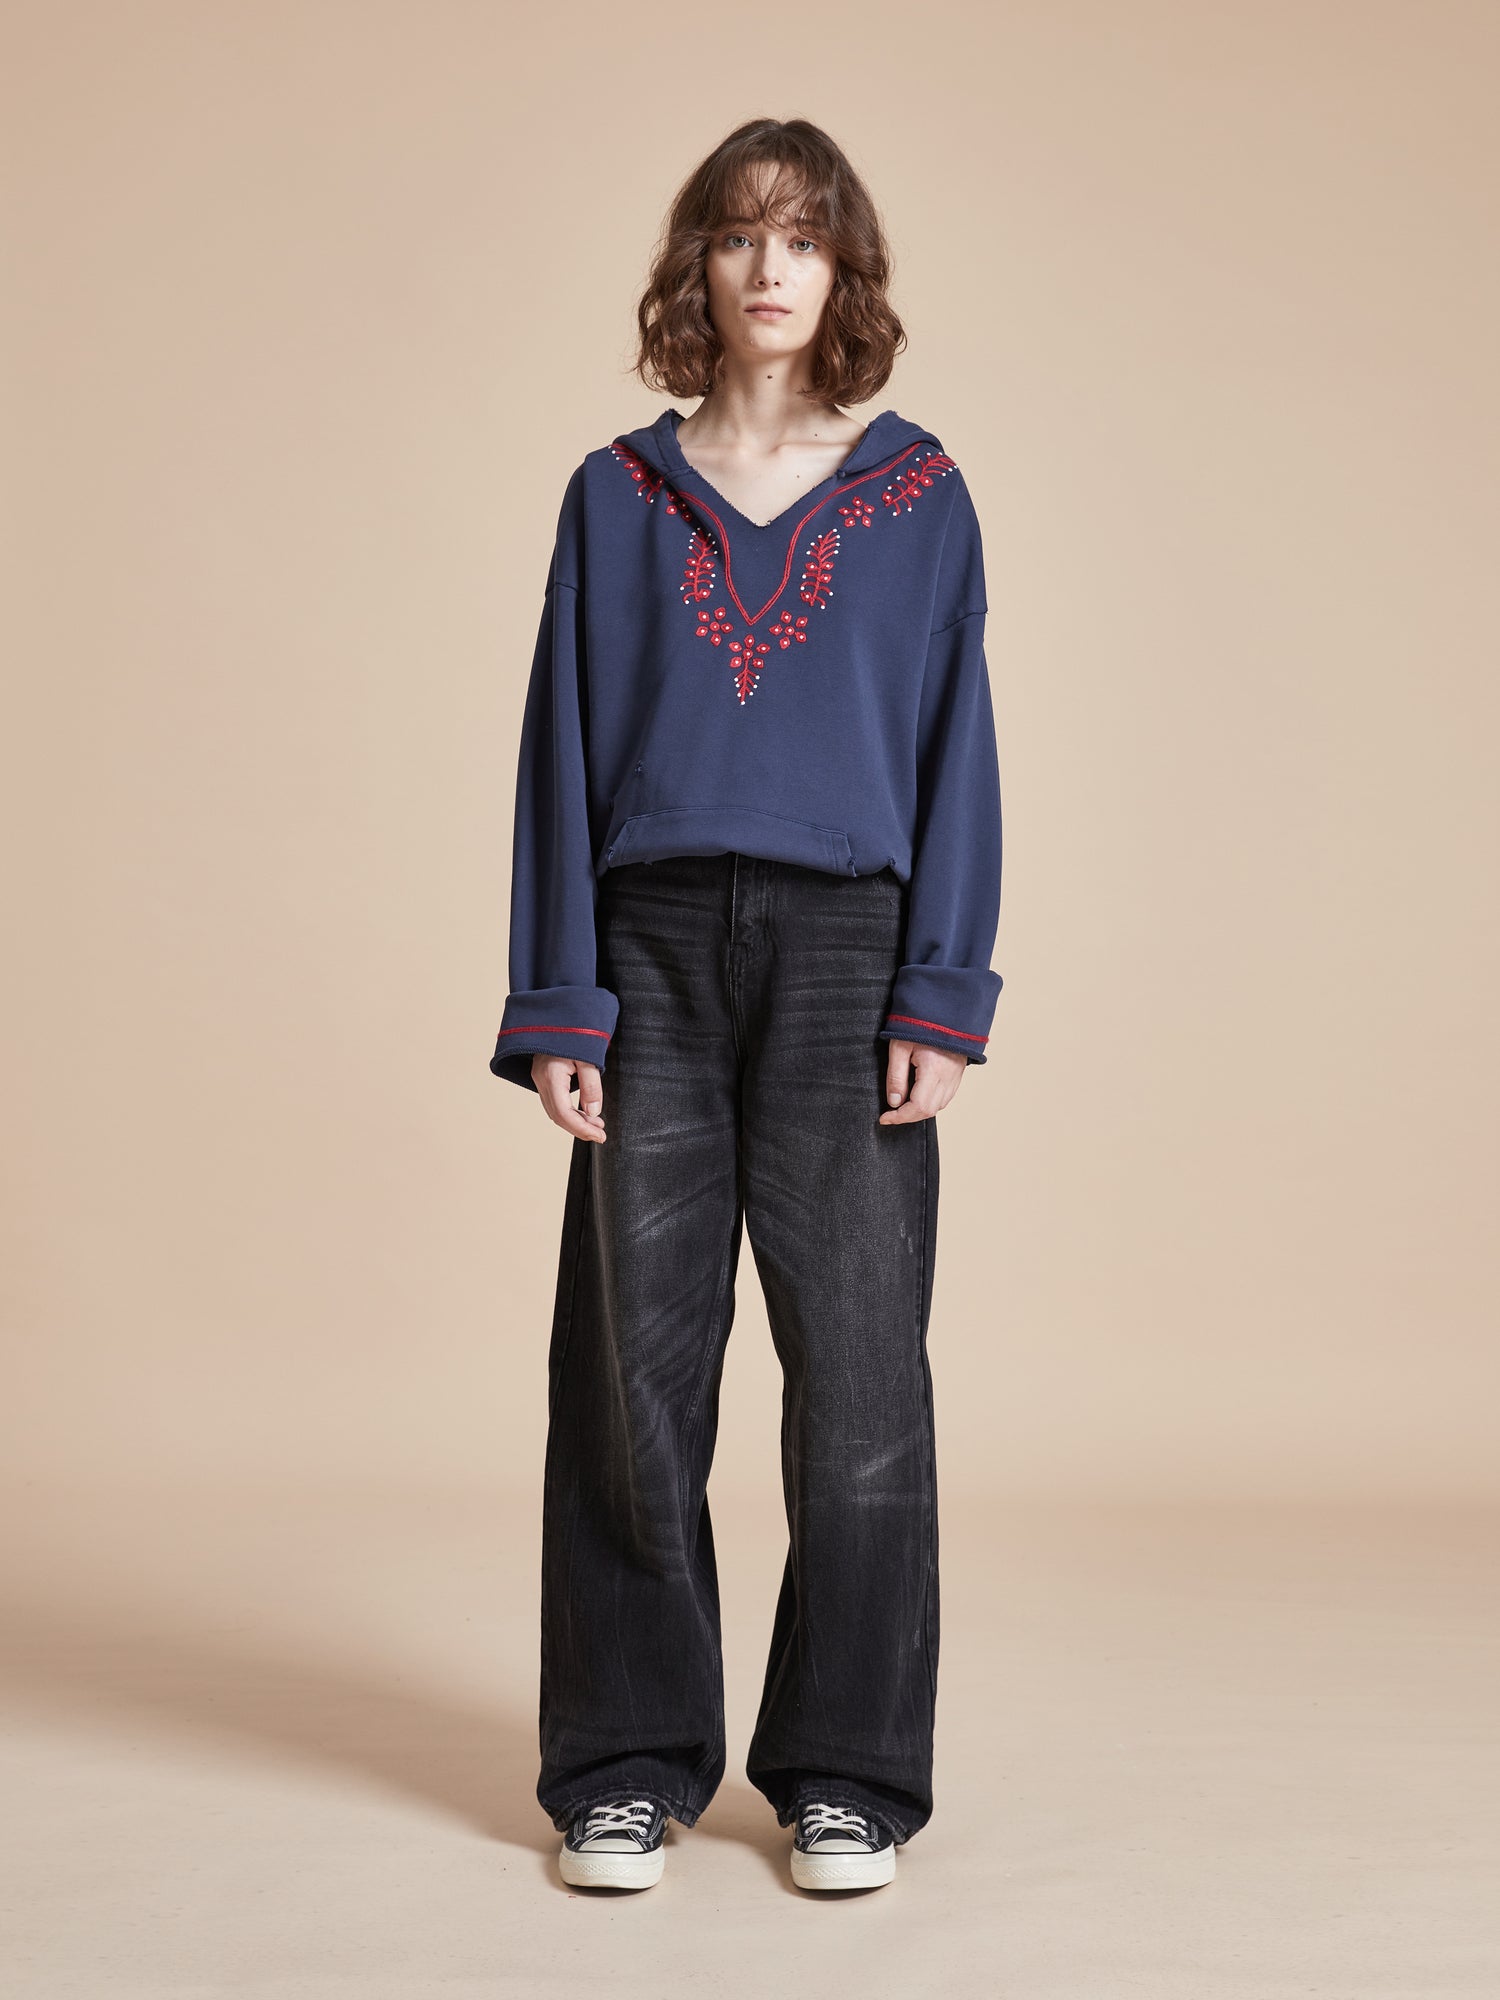 A model wearing a Found Indus Embroidered Hoodie and black pants.